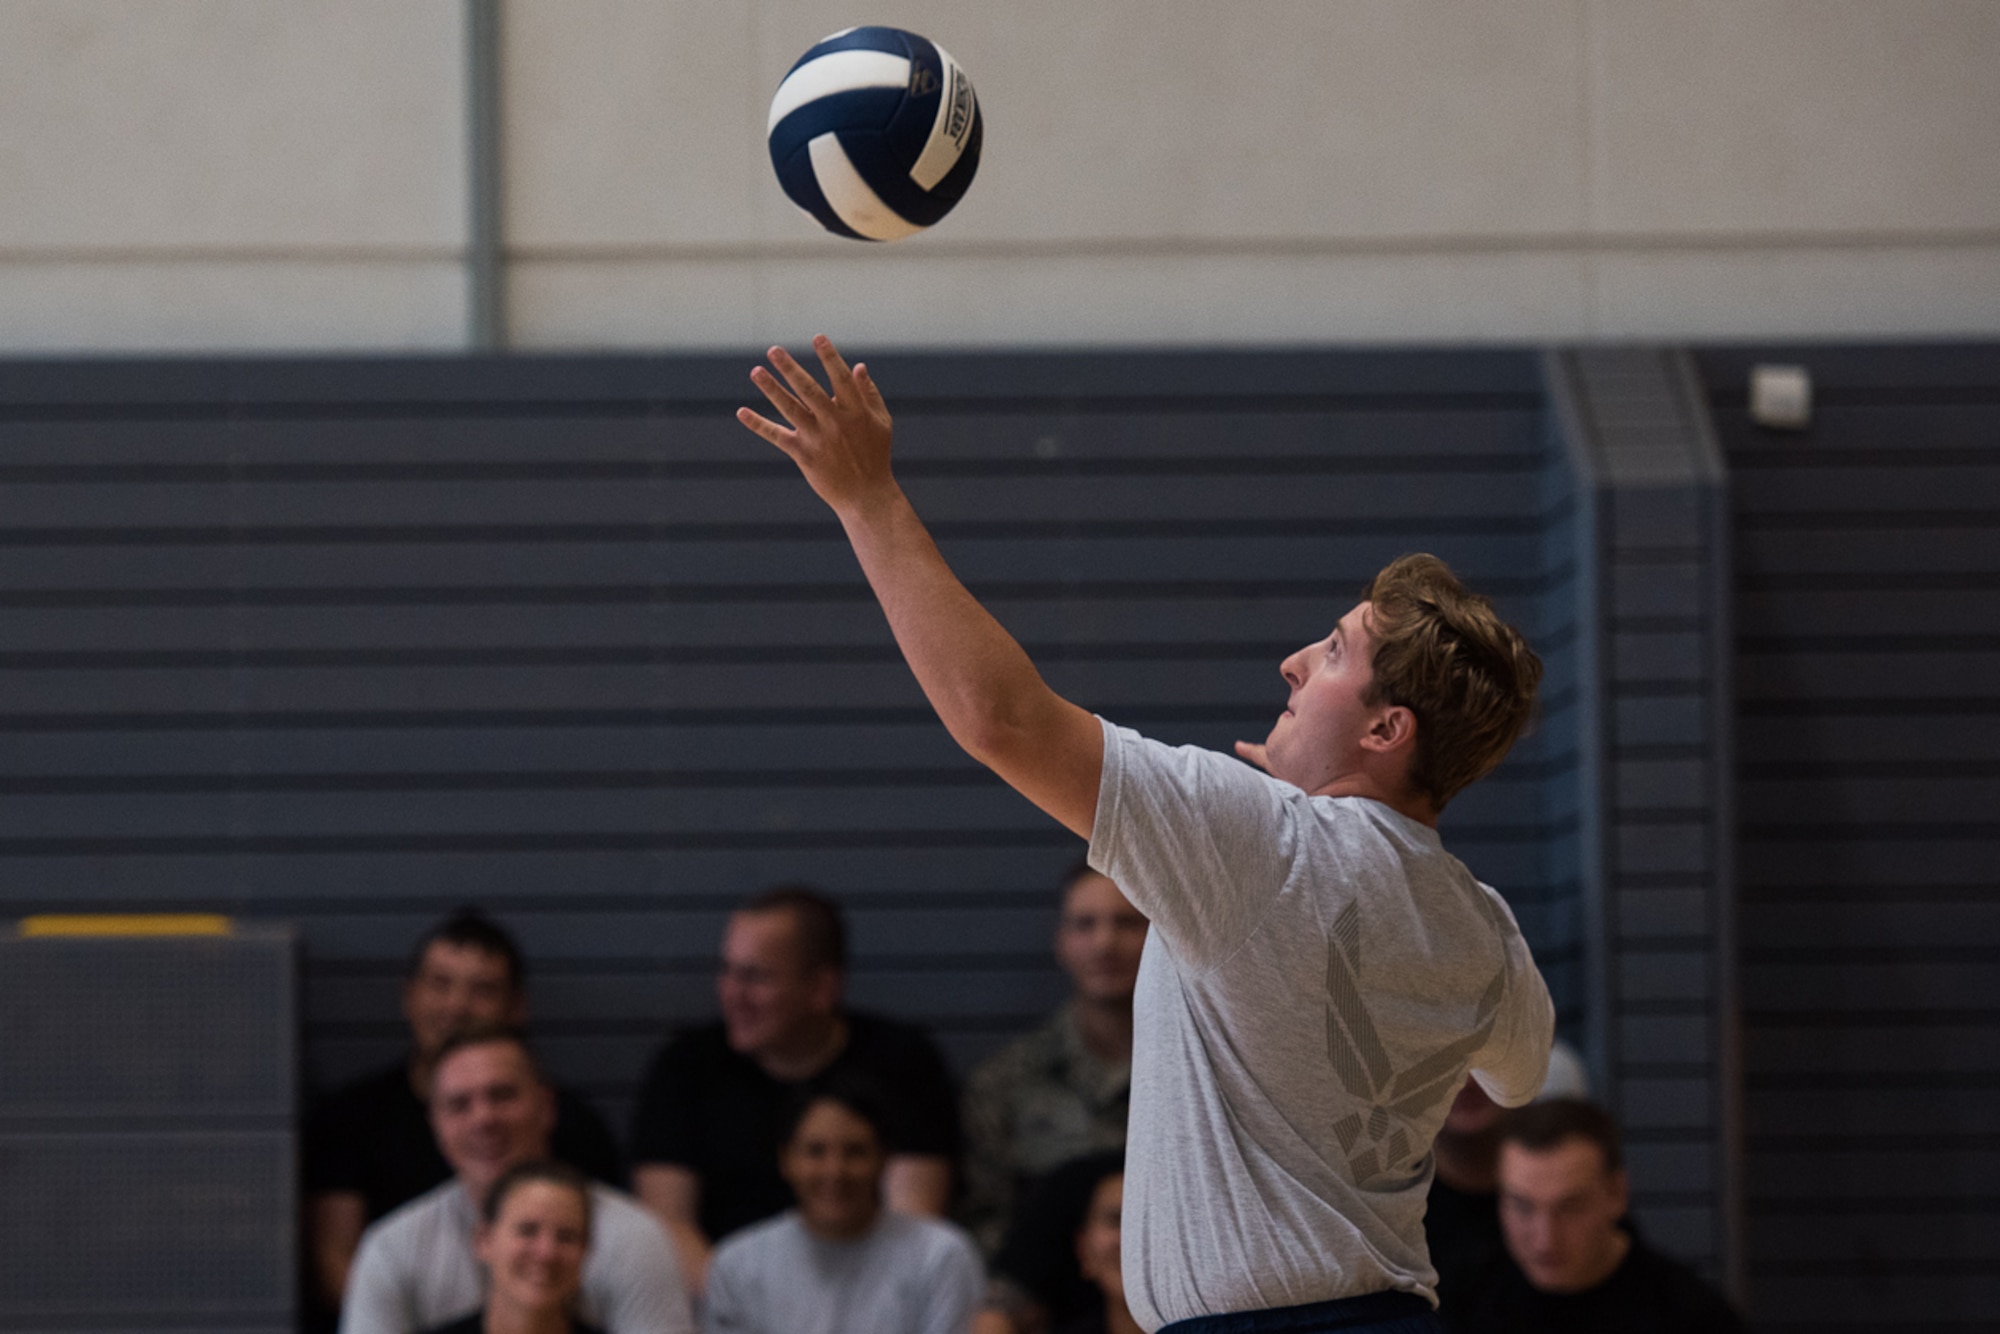 A U.S. Airman assigned to the 86th Airlift Wing, serves a volleyball during the Commander's Challenge on Ramstein Air Base, Germany. Sept. 6, 2017. Airmen from all over the wing competed in sports as a part of the annual resiliency day. (U.S. Air Force photo by Airman 1st Class Devin M. Rumbaugh)